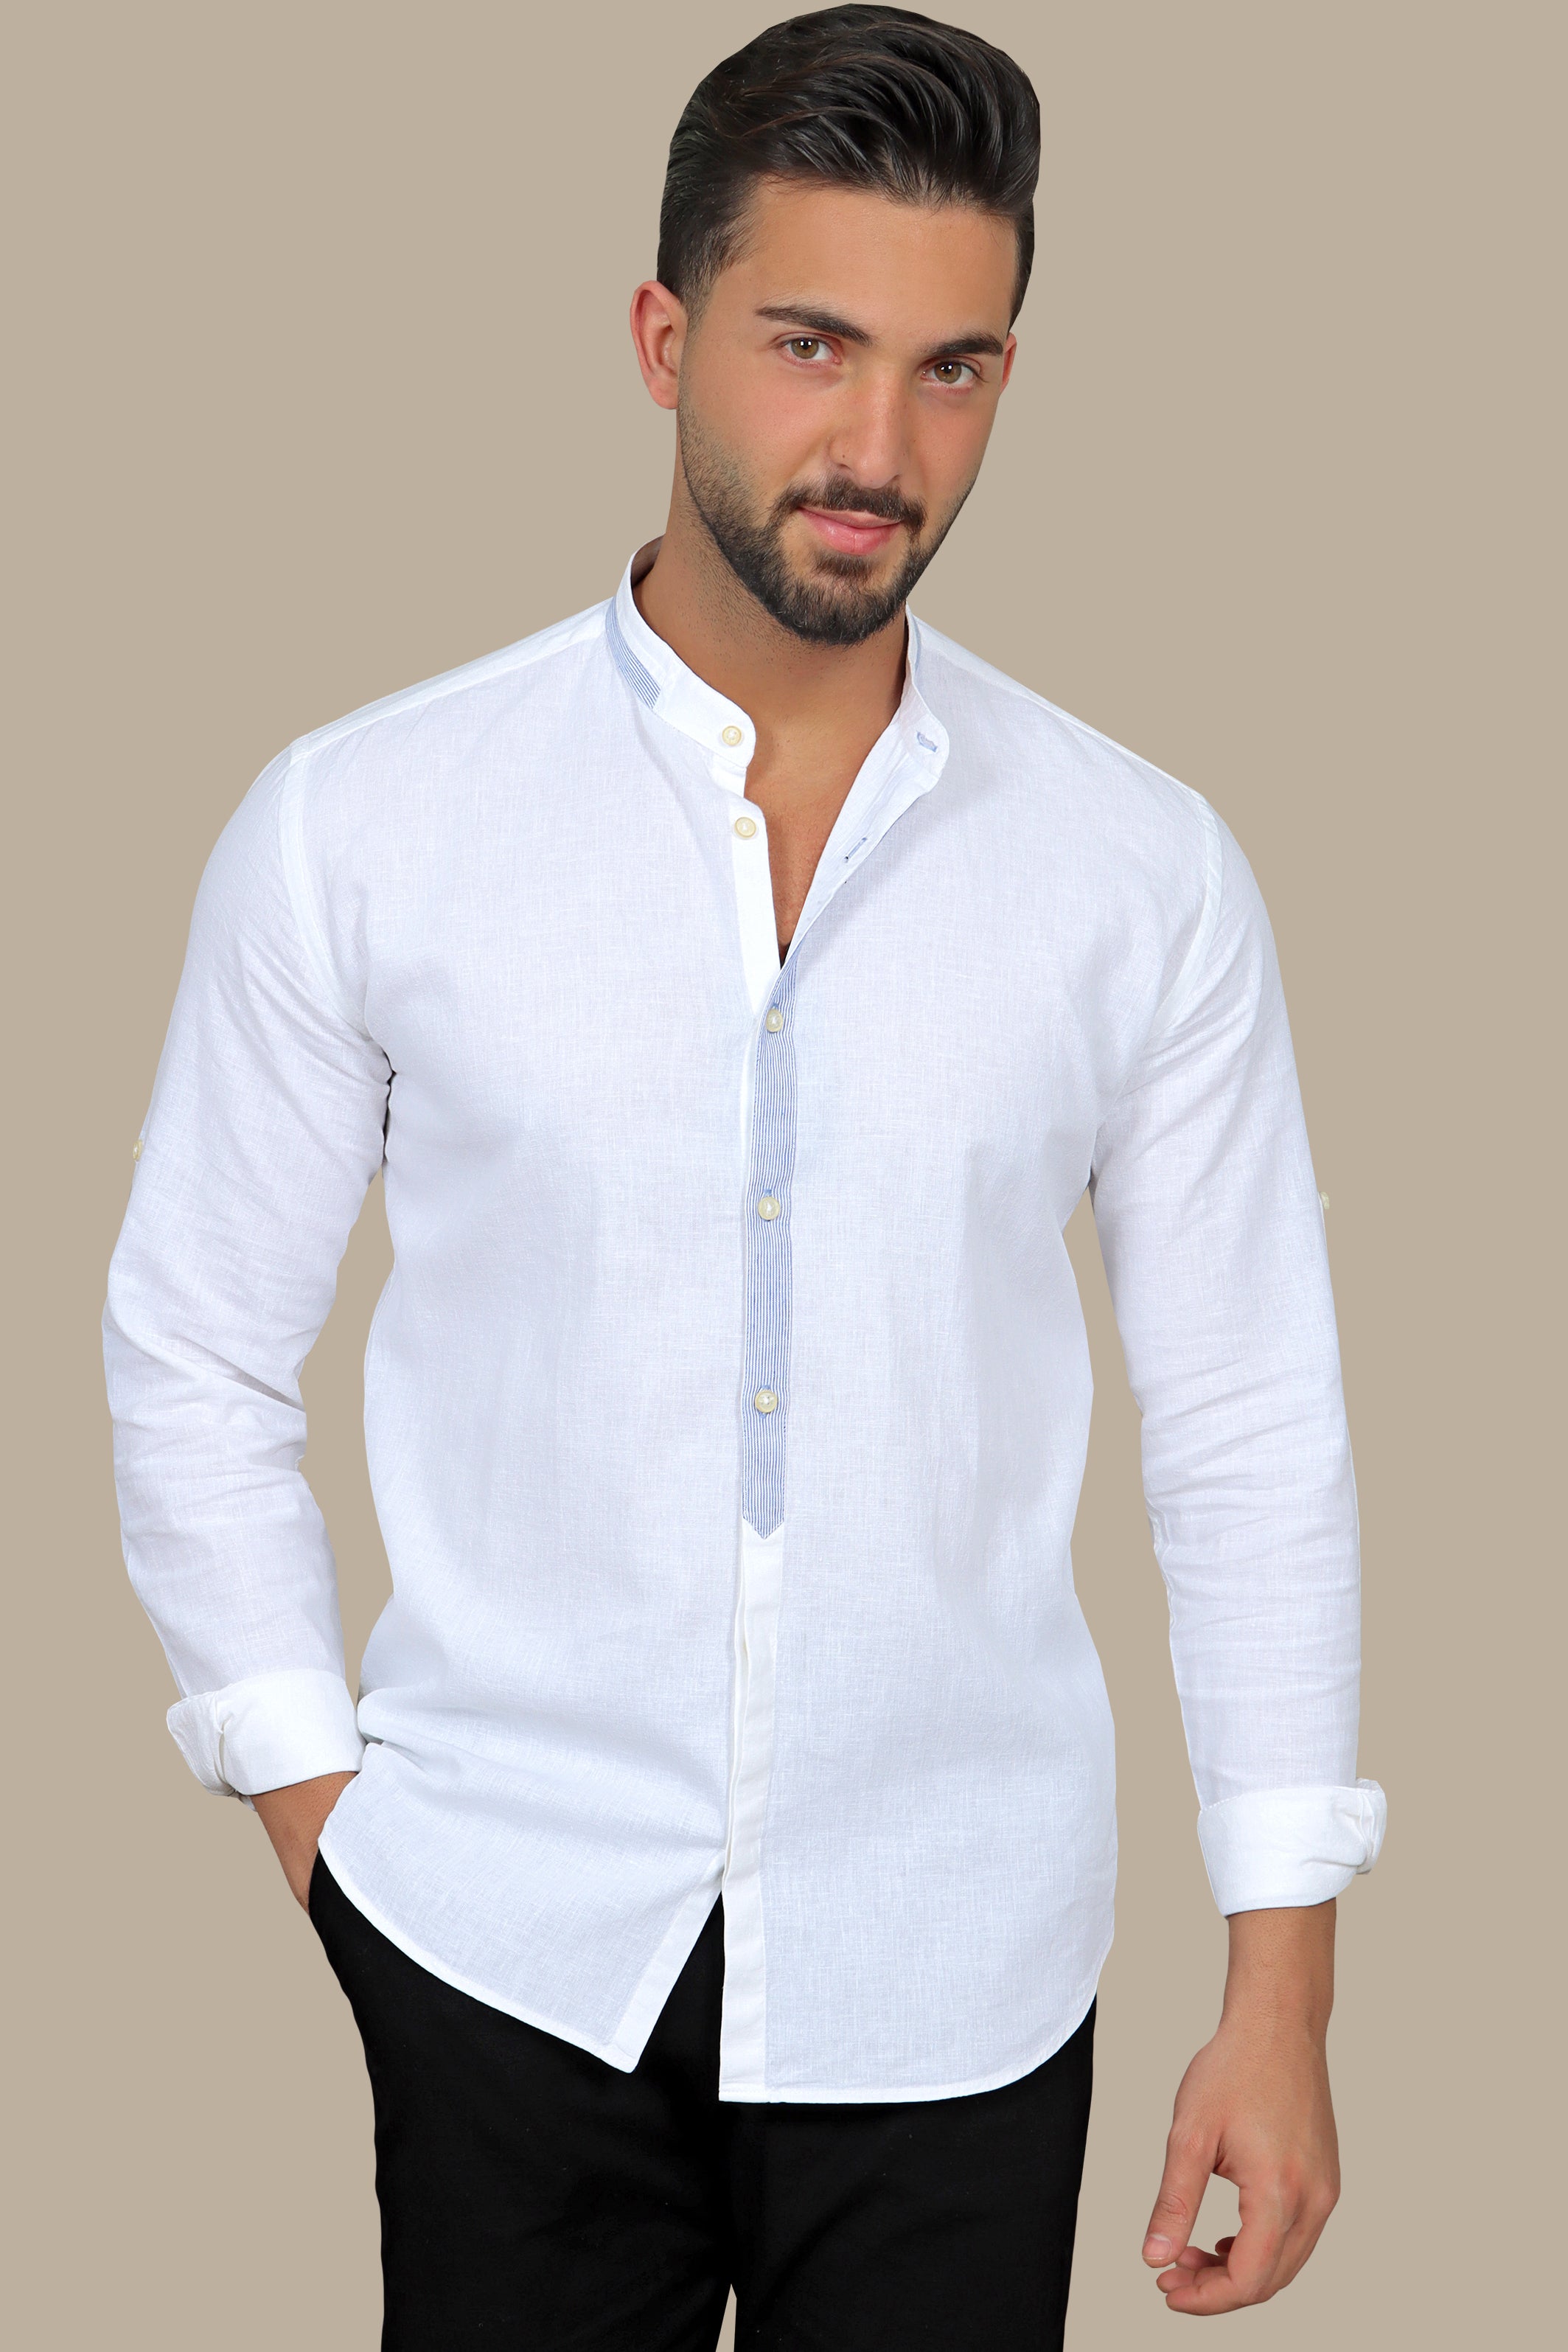 Skyline Chic: White Linen Col Mao Shirt with Blue Pip Detailing